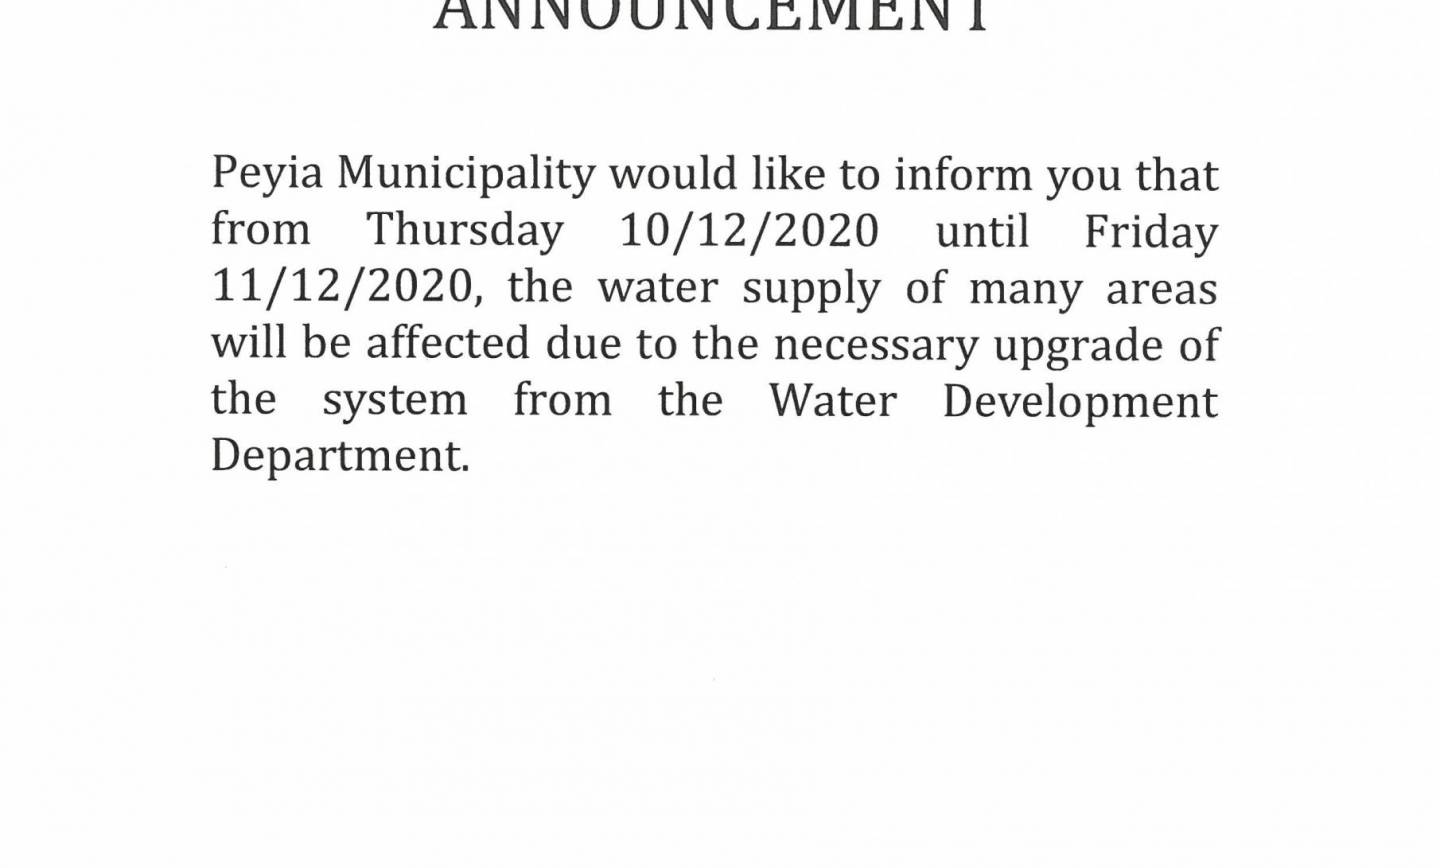 ANNOUNCEMENT ABOUT THE WATER SUPPLY FROM 10/12 – 11/12/20